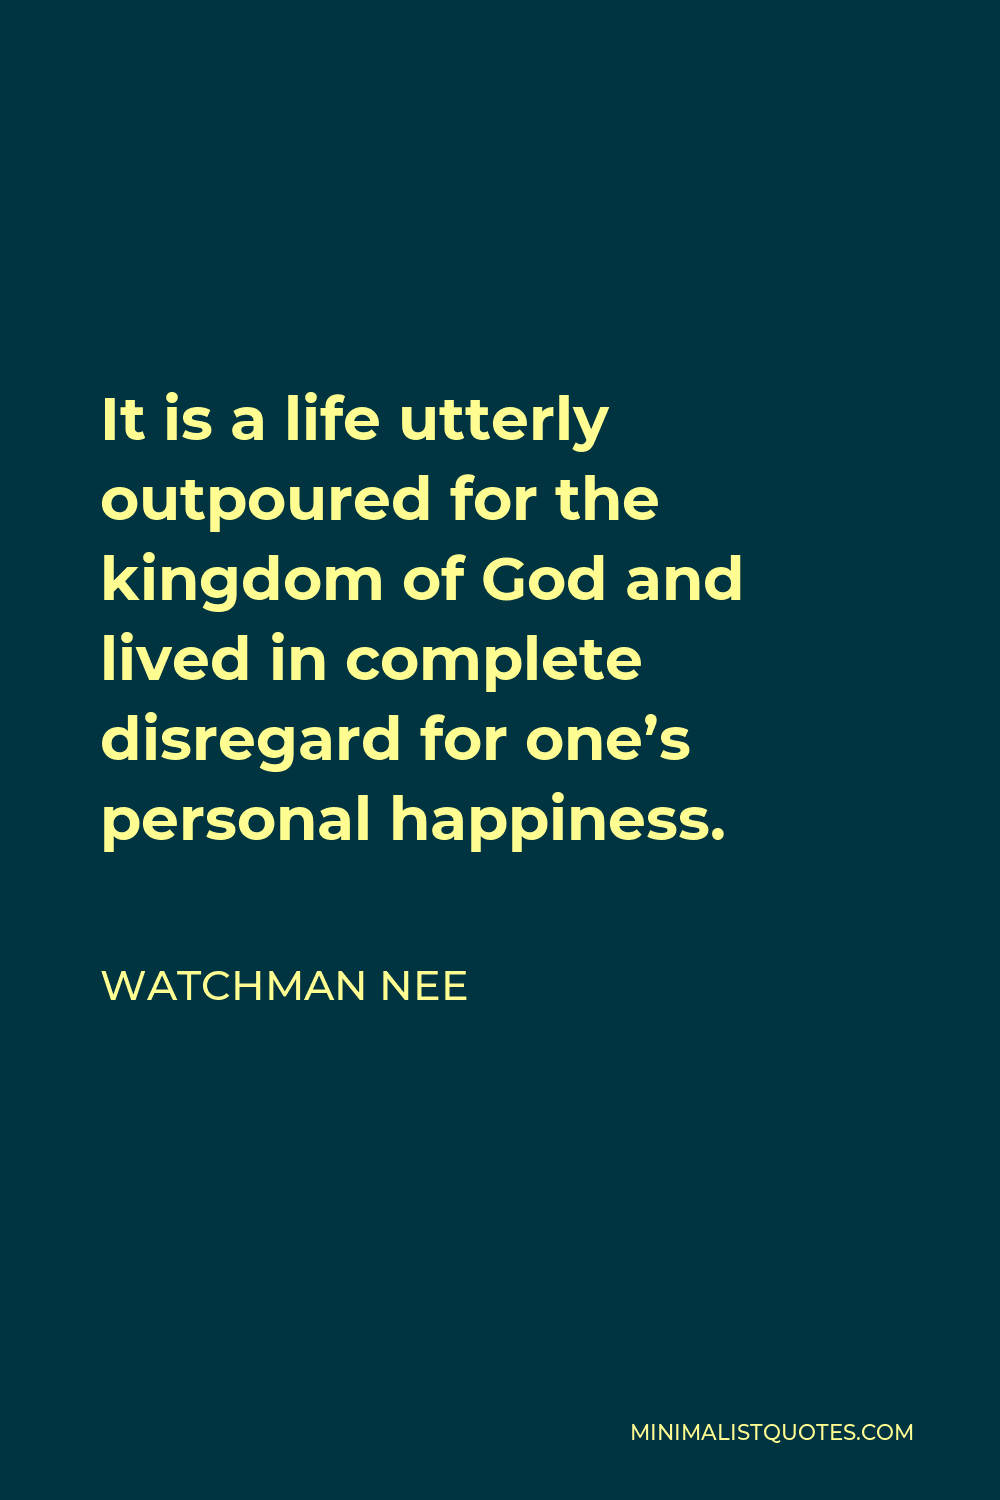 Watchman Nee Quote - It is a life utterly outpoured for the kingdom of God and lived in complete disregard for one’s personal happiness.